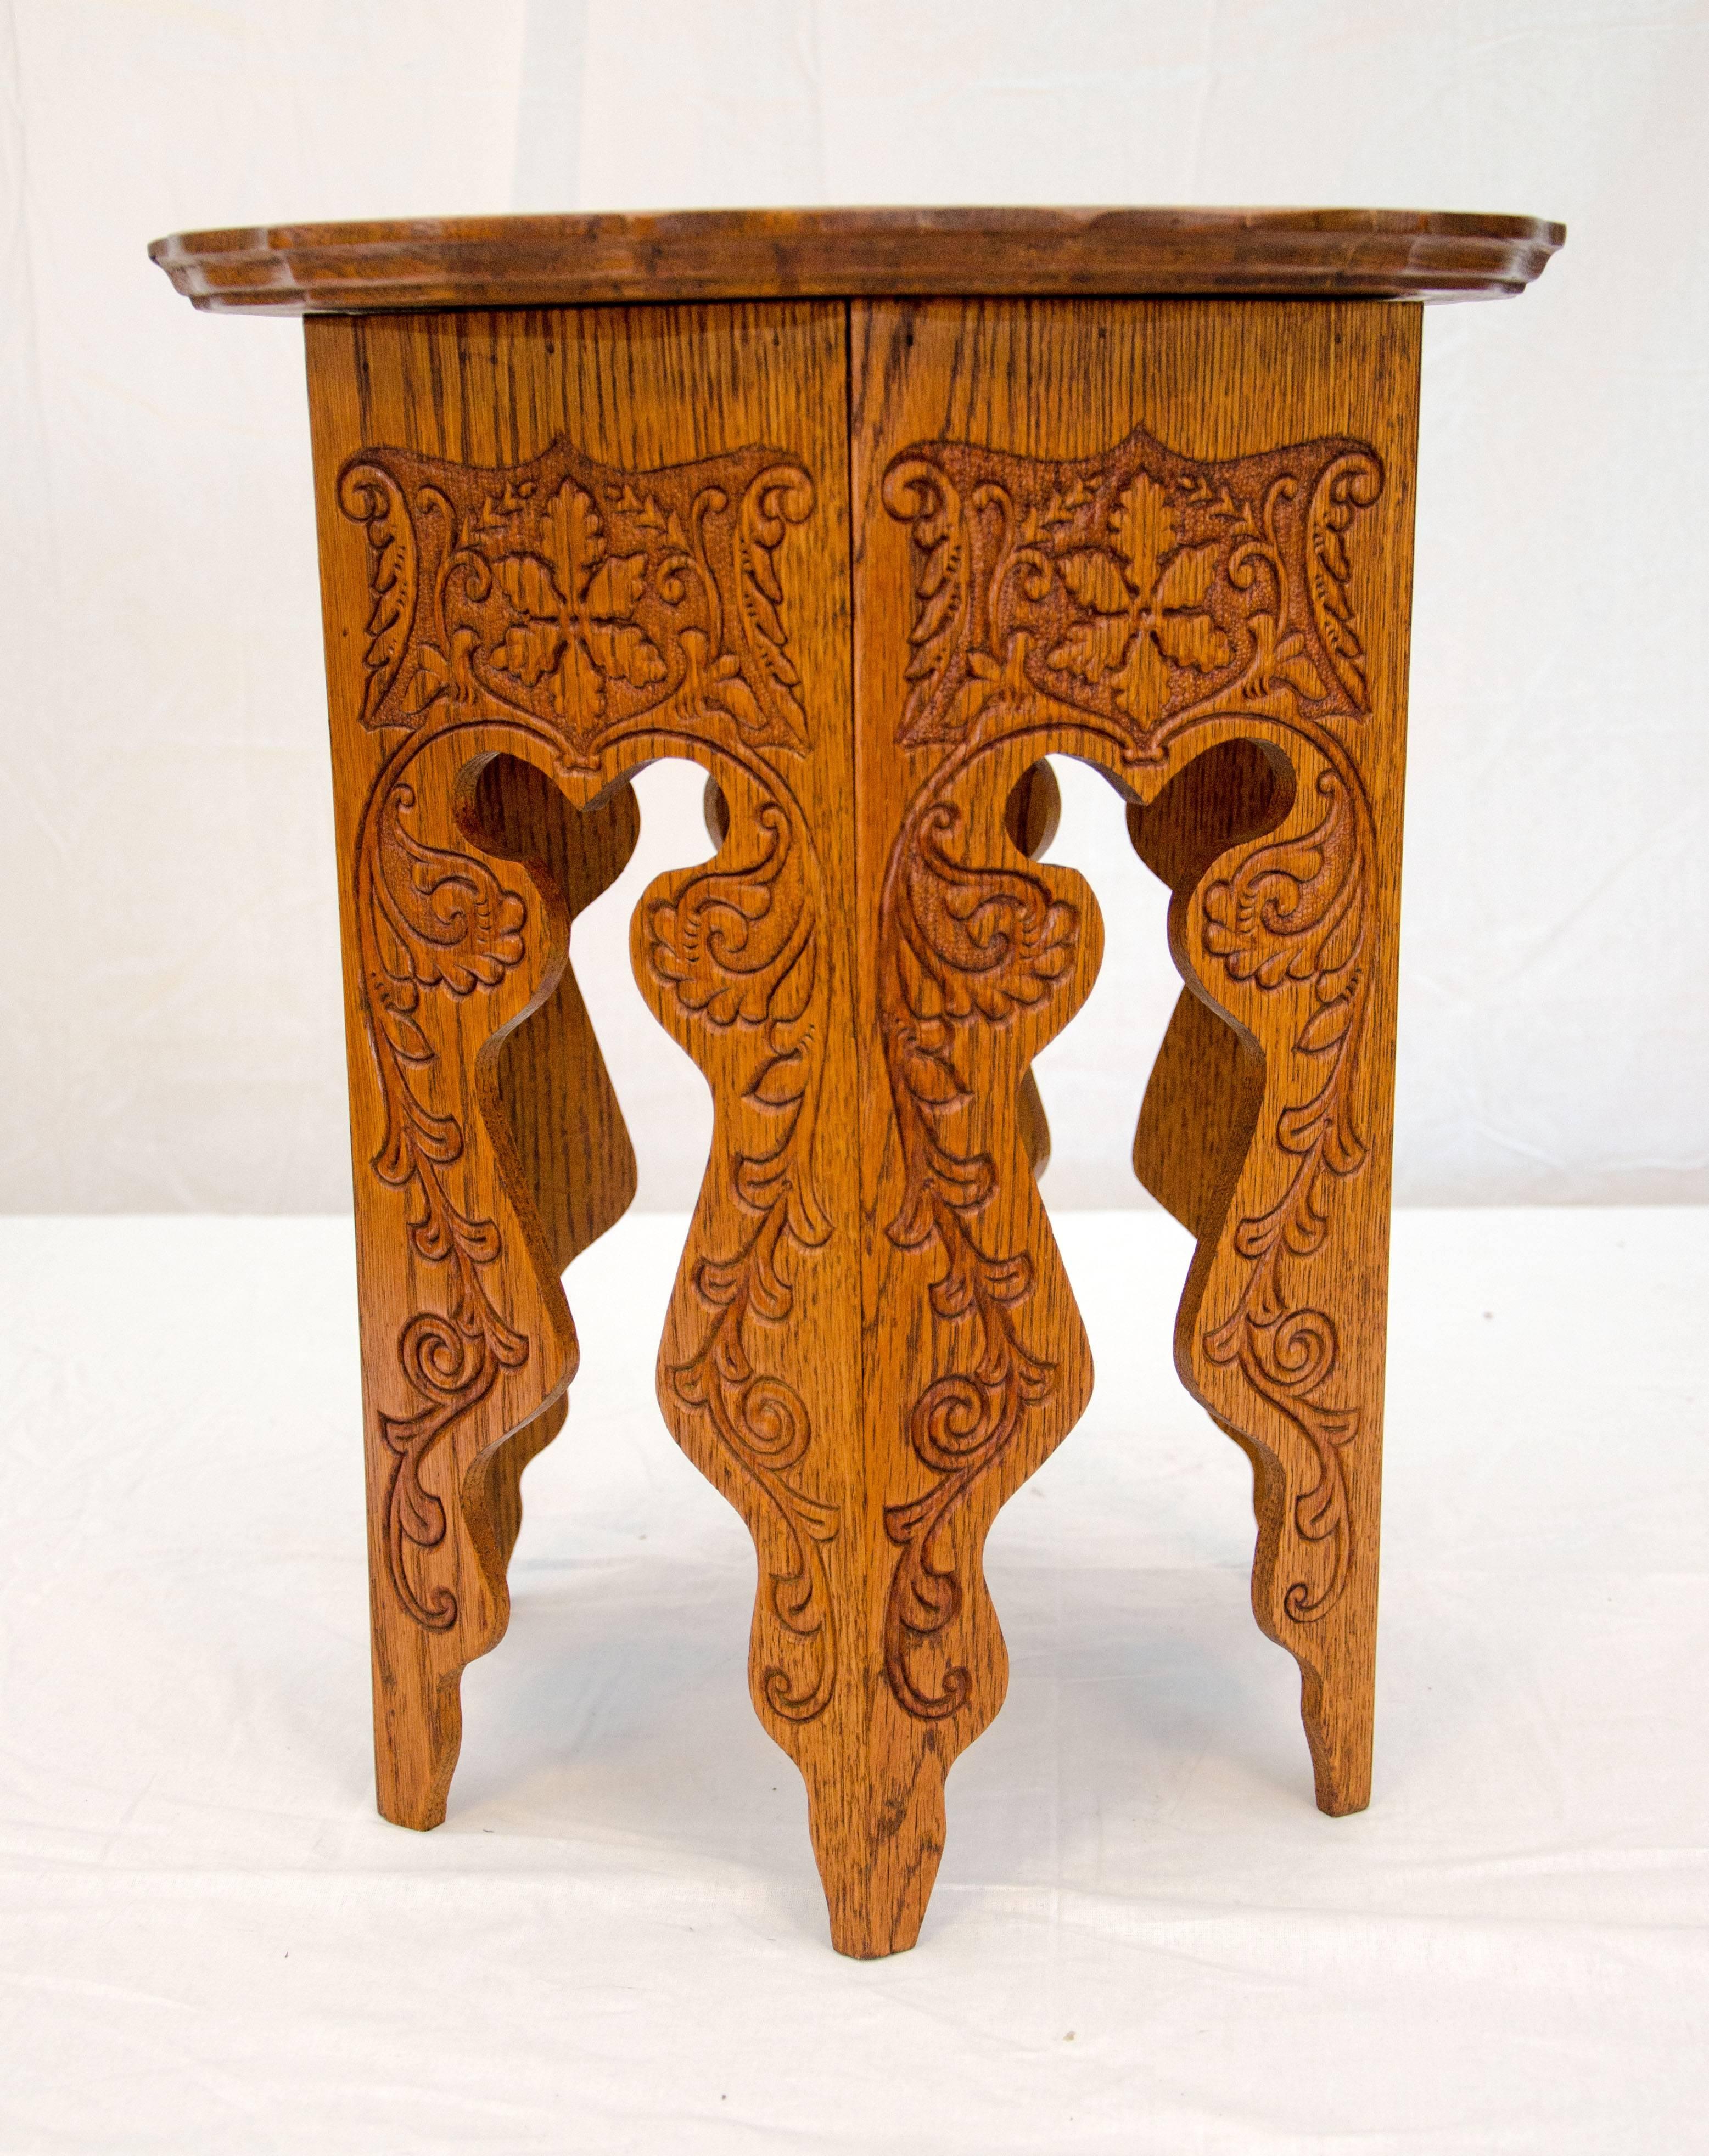 Victorian Oak Tabouret Side Table or Plant Stand In Good Condition For Sale In Crockett, CA